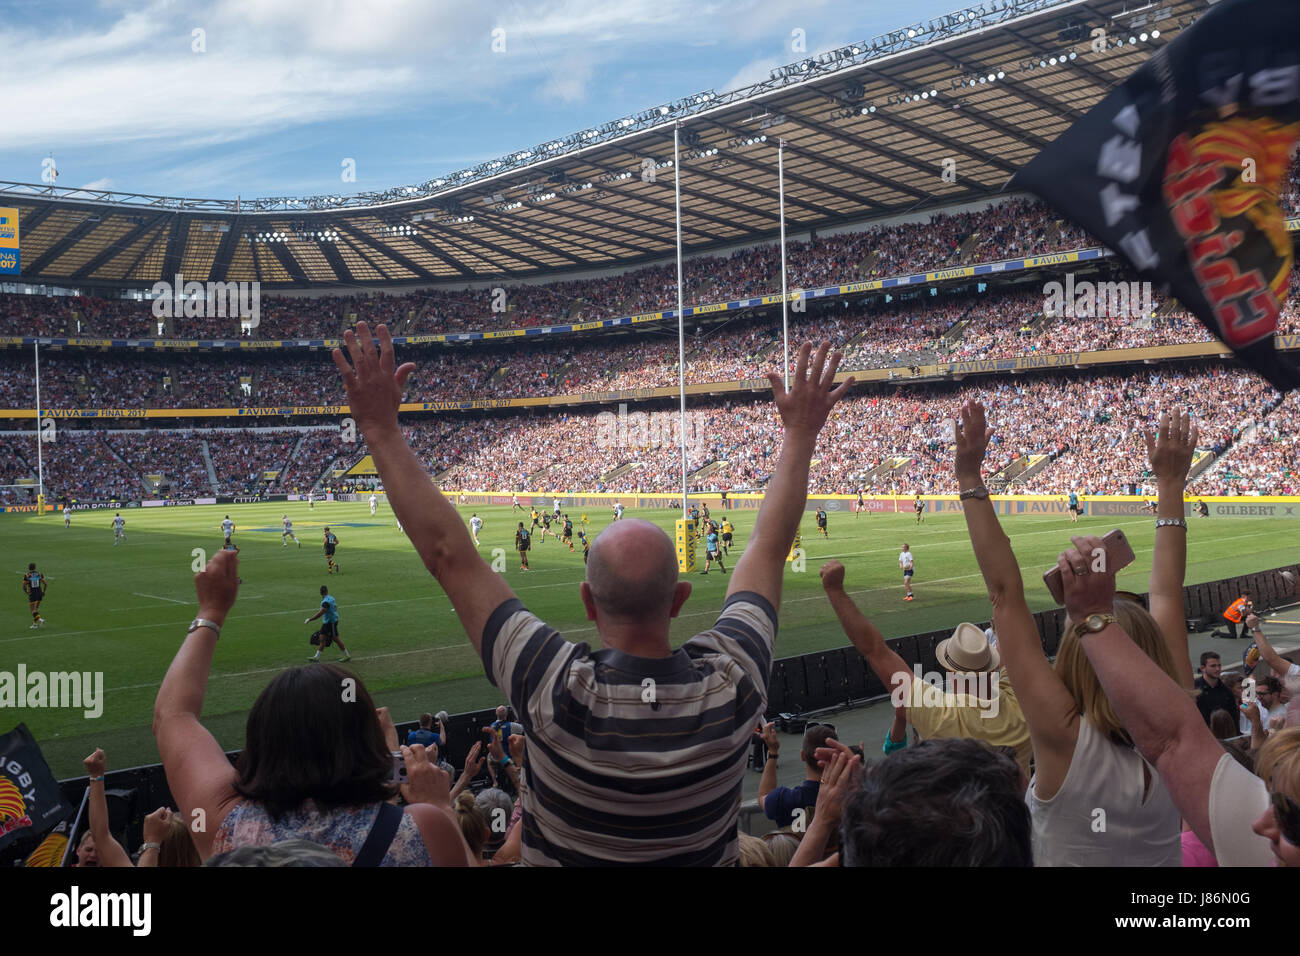 Twickenham, UK. 27th May, 2017. Exeter Chiefs fans cheer the final whistle in their victory over Wasps in extra time at Twickenham Credit: On Sight Photographic/Alamy Live News Stock Photo